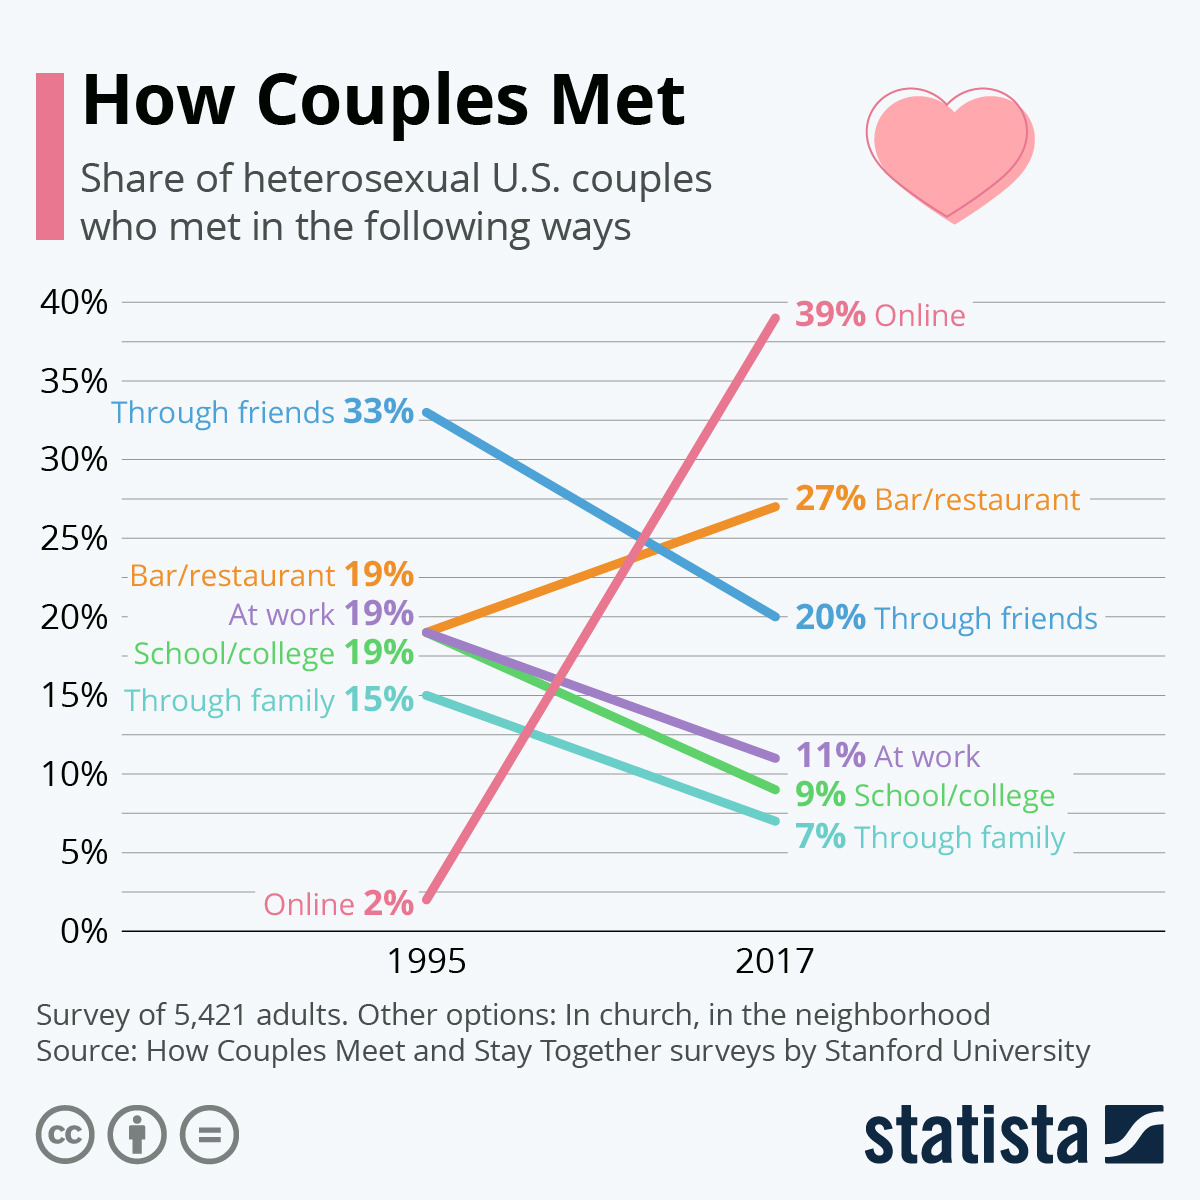 Online Dating Is the Way to Meet In 2020 #Infographi…